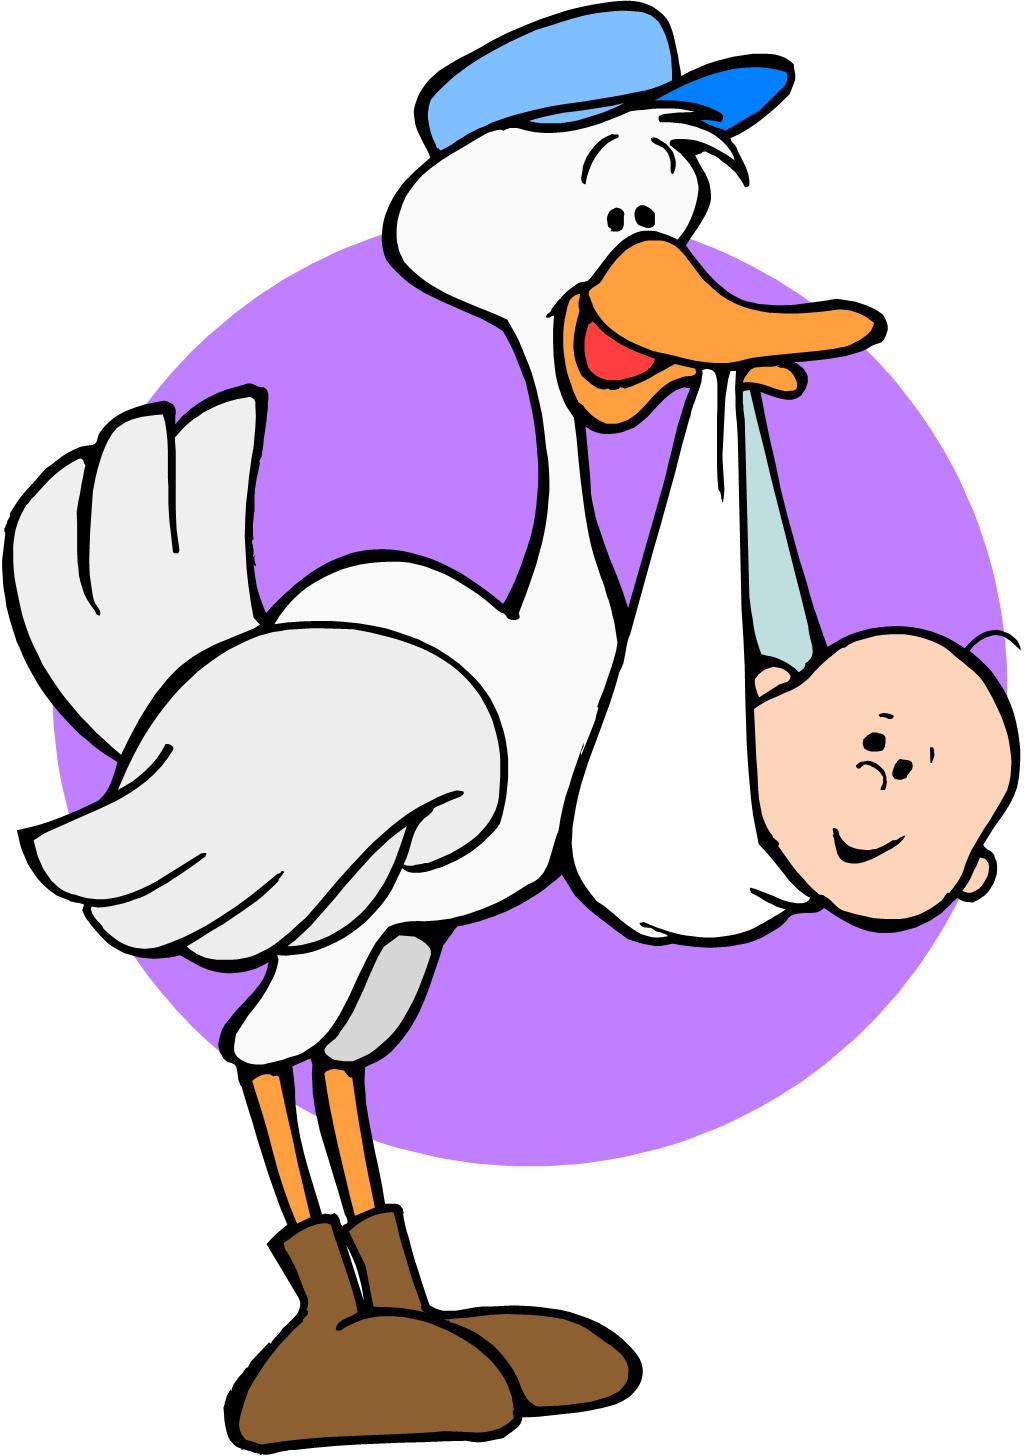 Stork With Baby - ClipArt Best